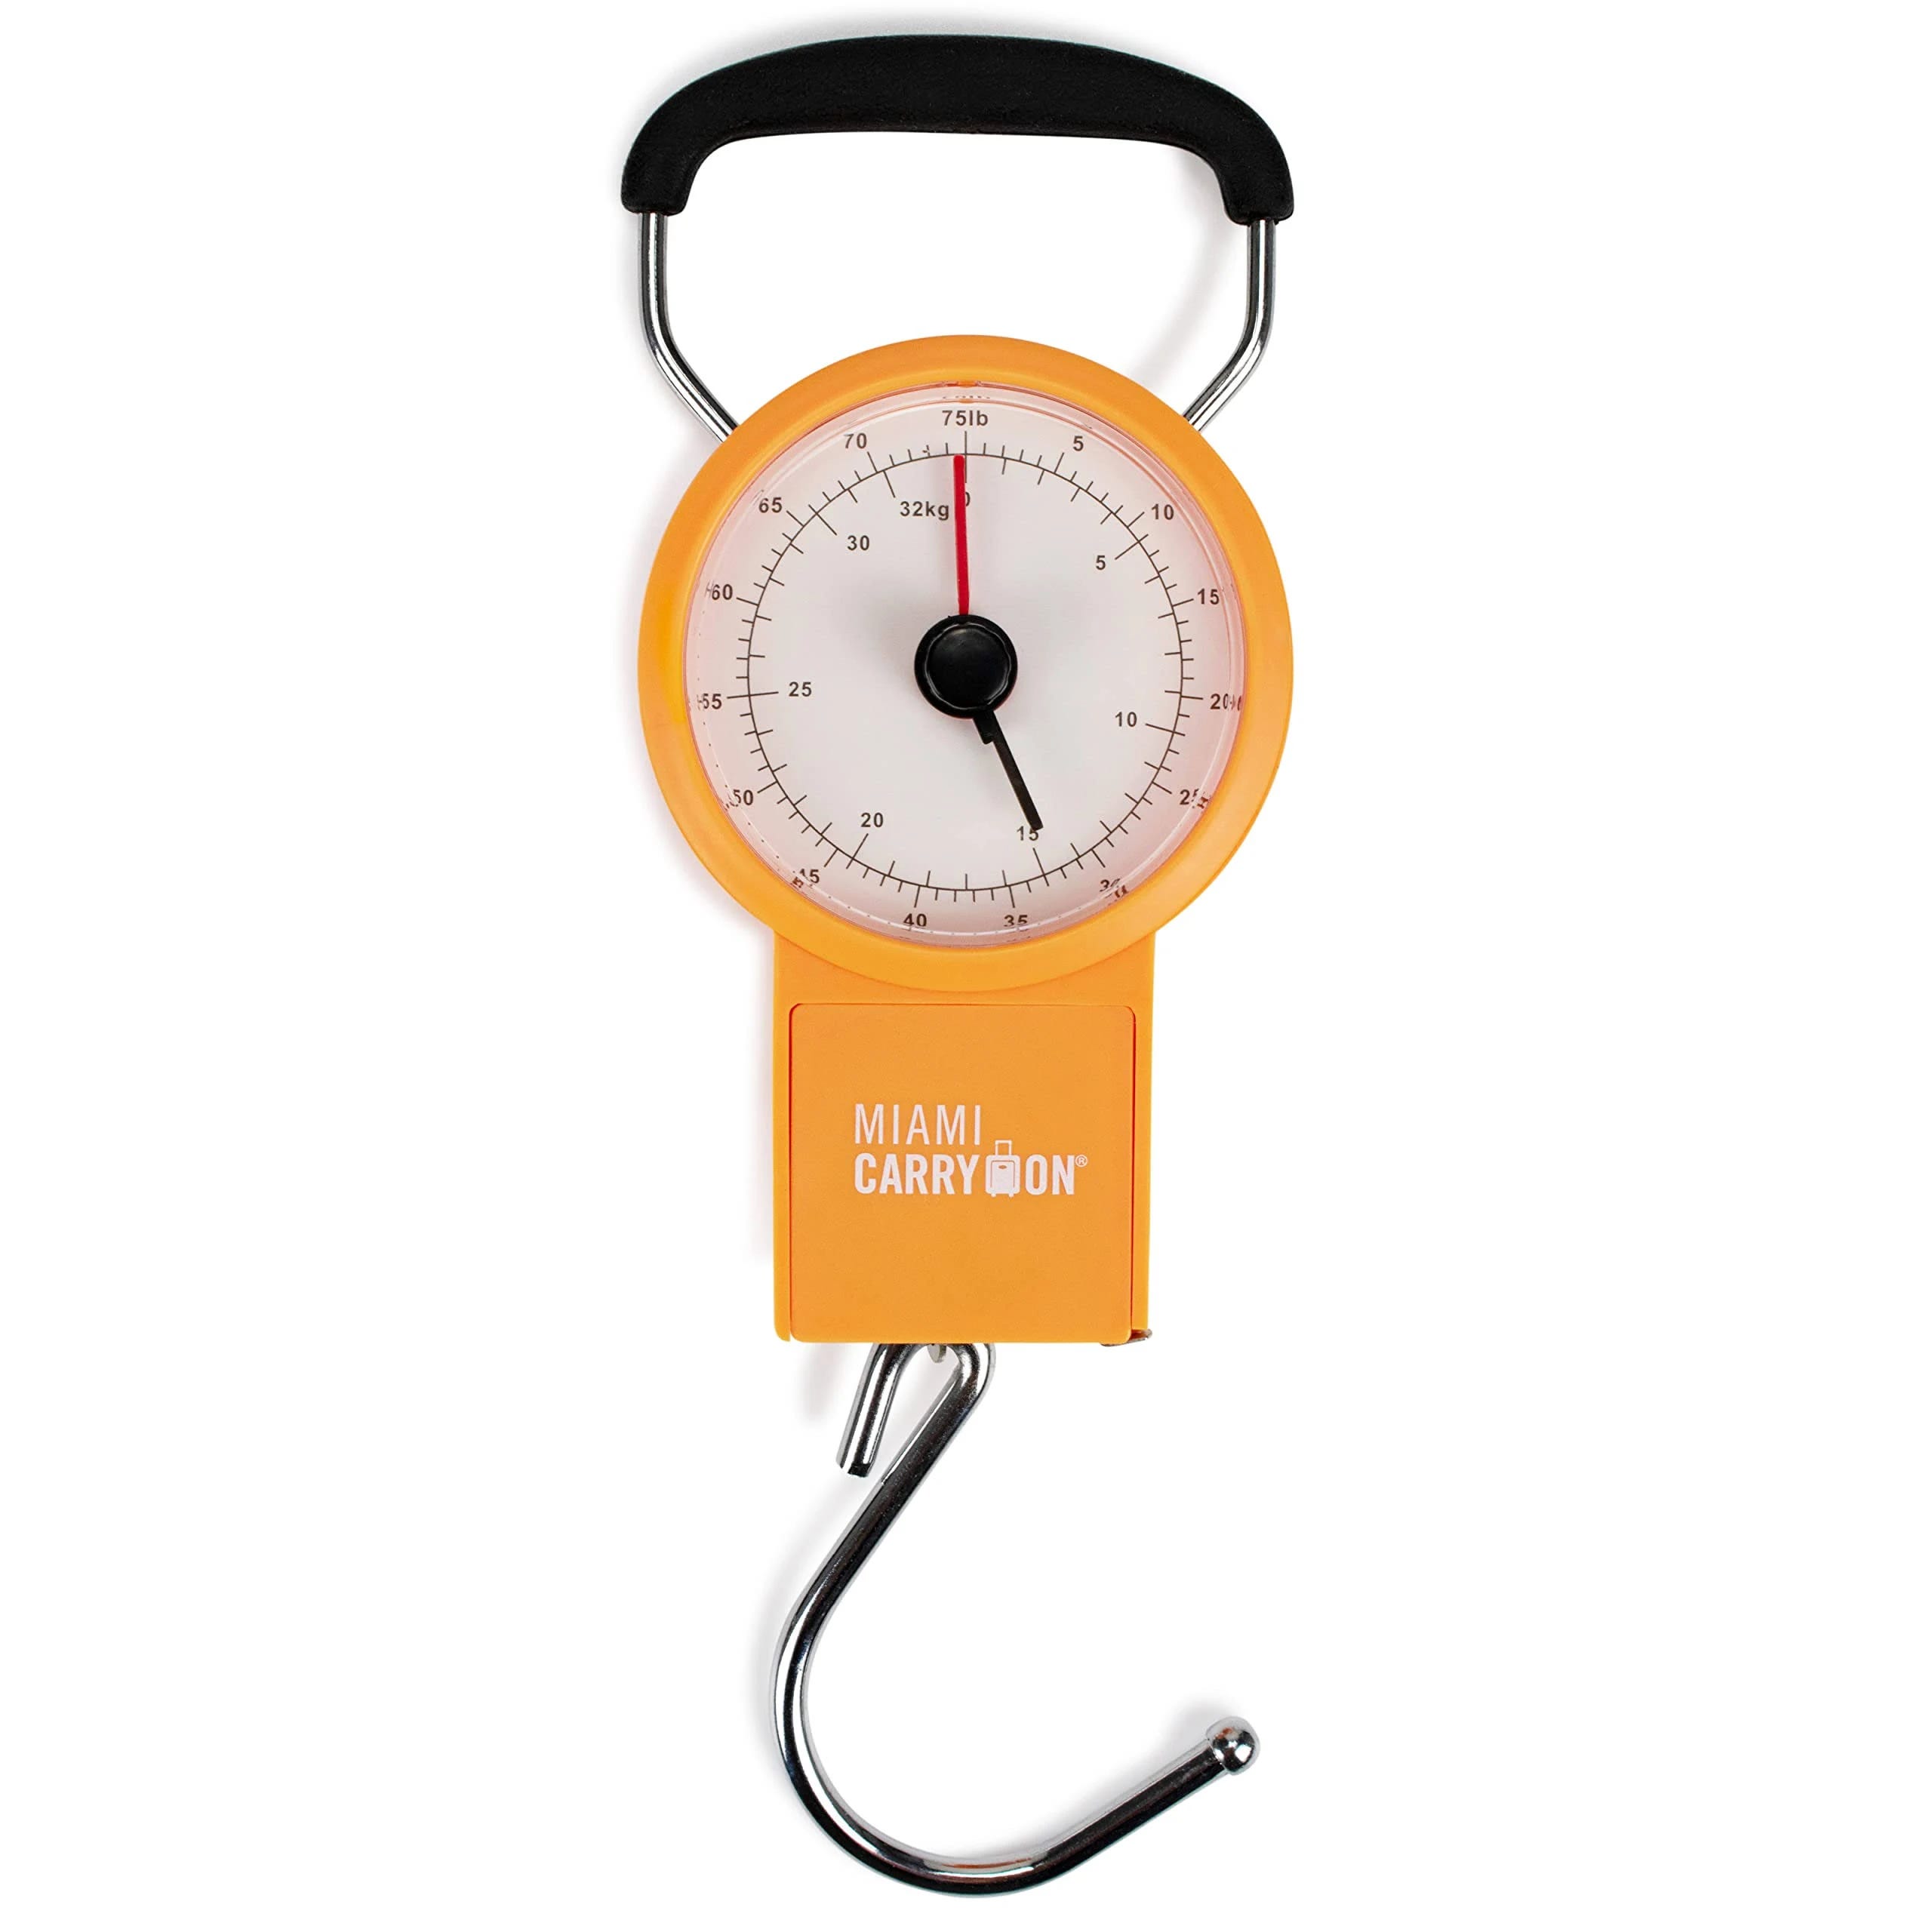 Miami Carryon Mechanical Luggage Scale - High Accuracy & Classy Design | Image